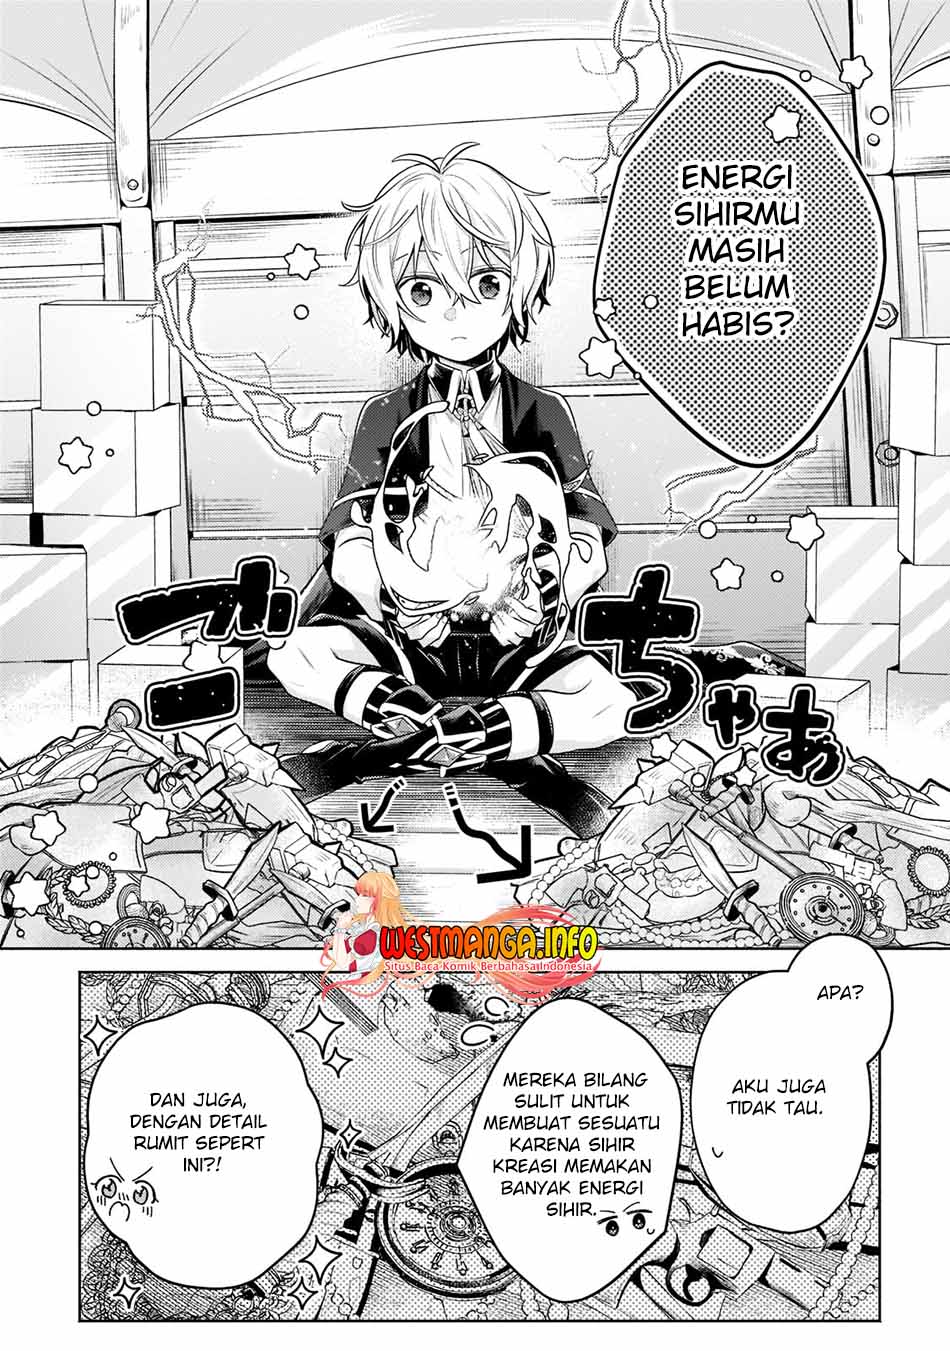 Fun Territory Defense Of The Easy-Going Lord ~The Nameless Village Is Made Into The Strongest Fortified City By Production Magic~ Chapter 08 - 203